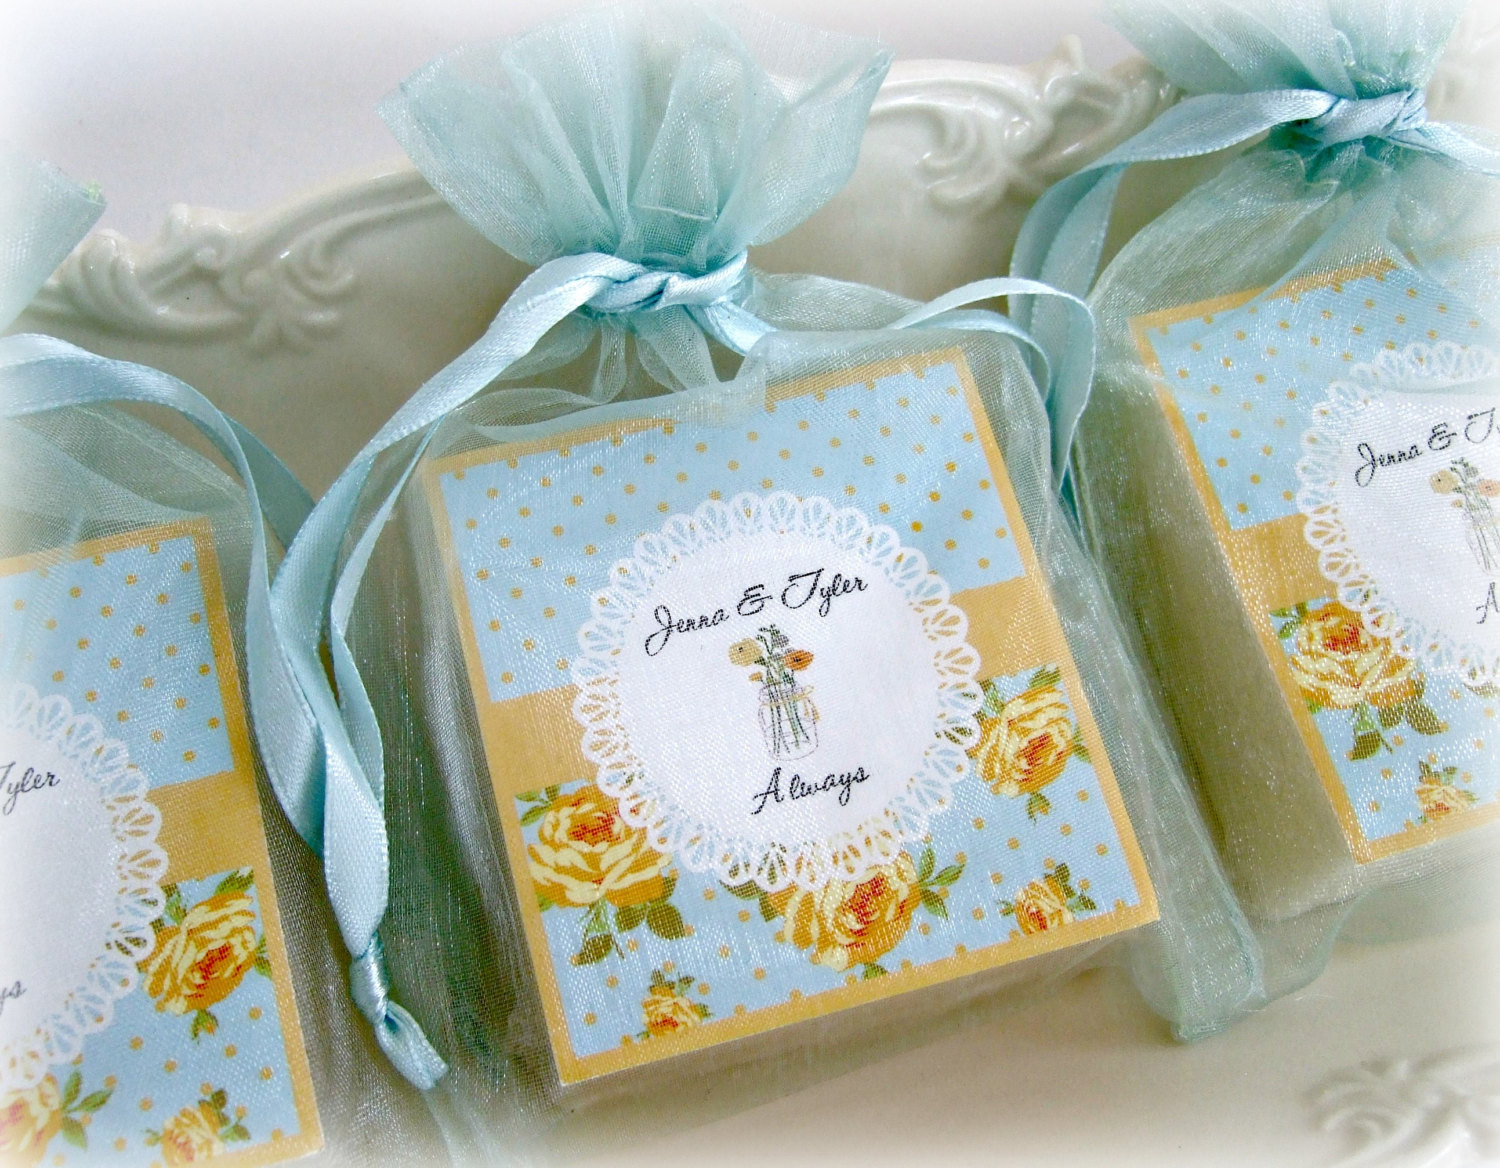 Tea Party Favors Baby Shower
 Shabby Chic Favors mason jar favors tea party favors